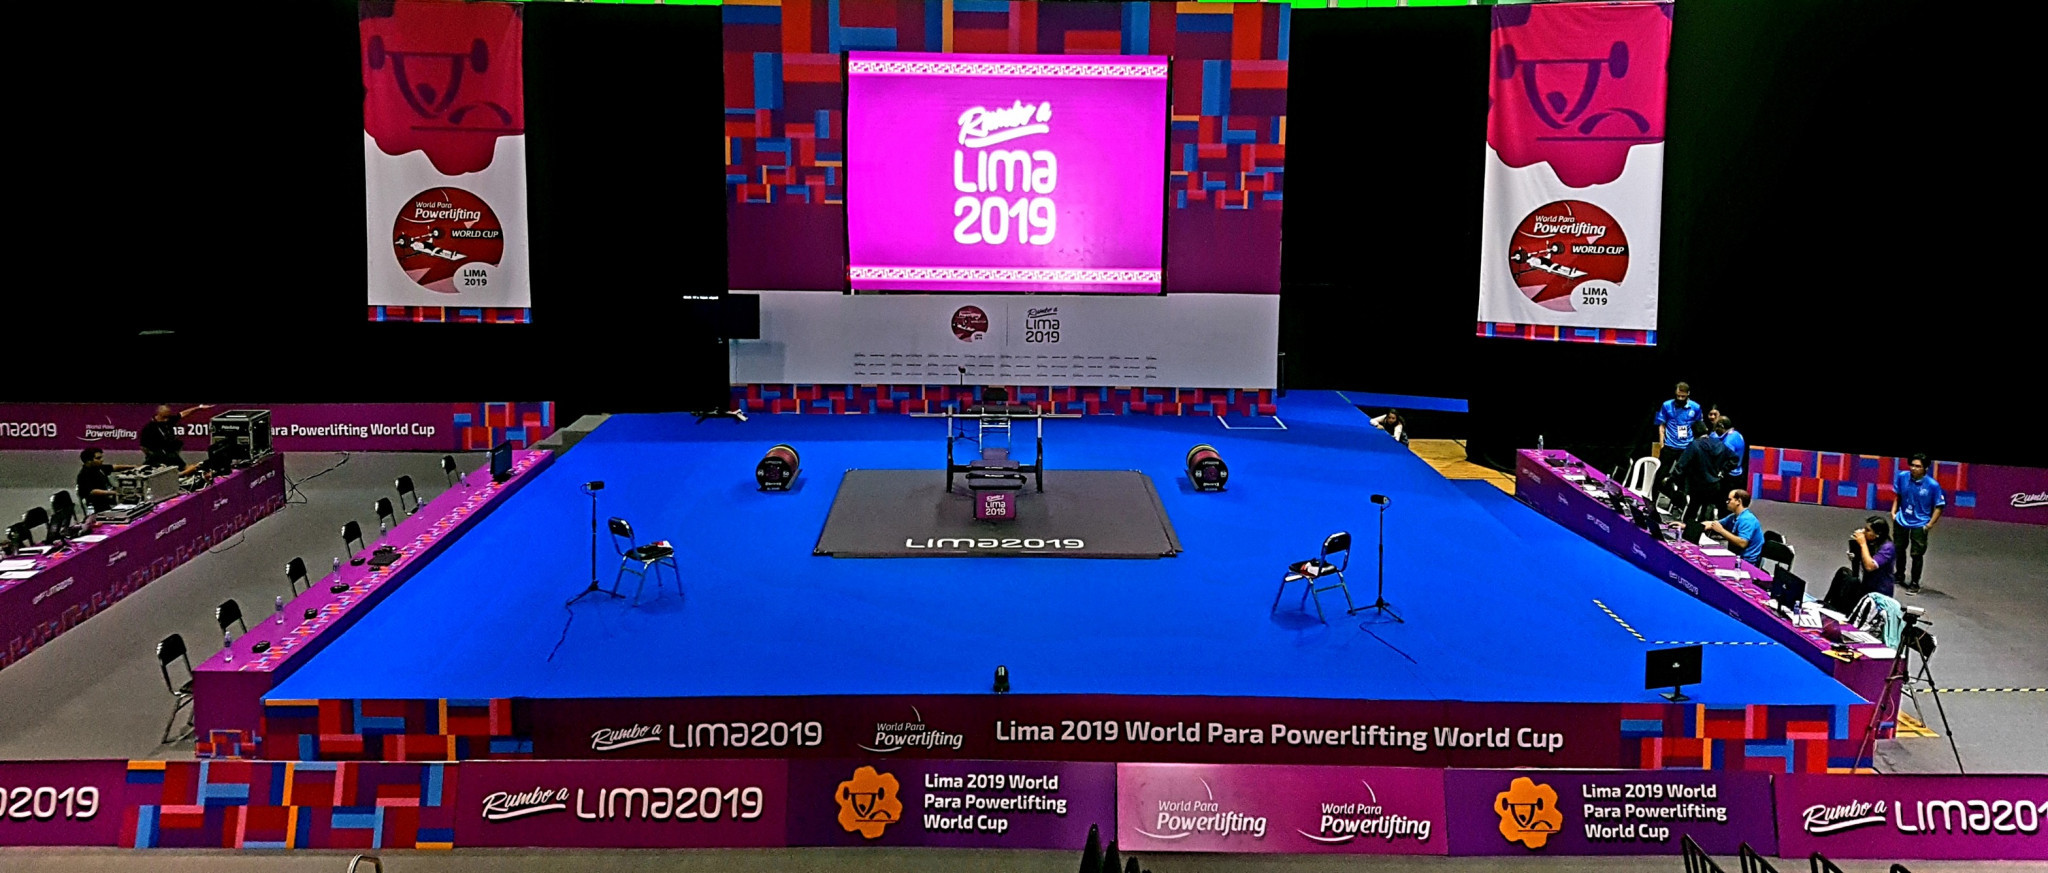 The final day of the World Para Powerlifting World Cup in Lima will take place tomorrow ©Para Powerlifting 